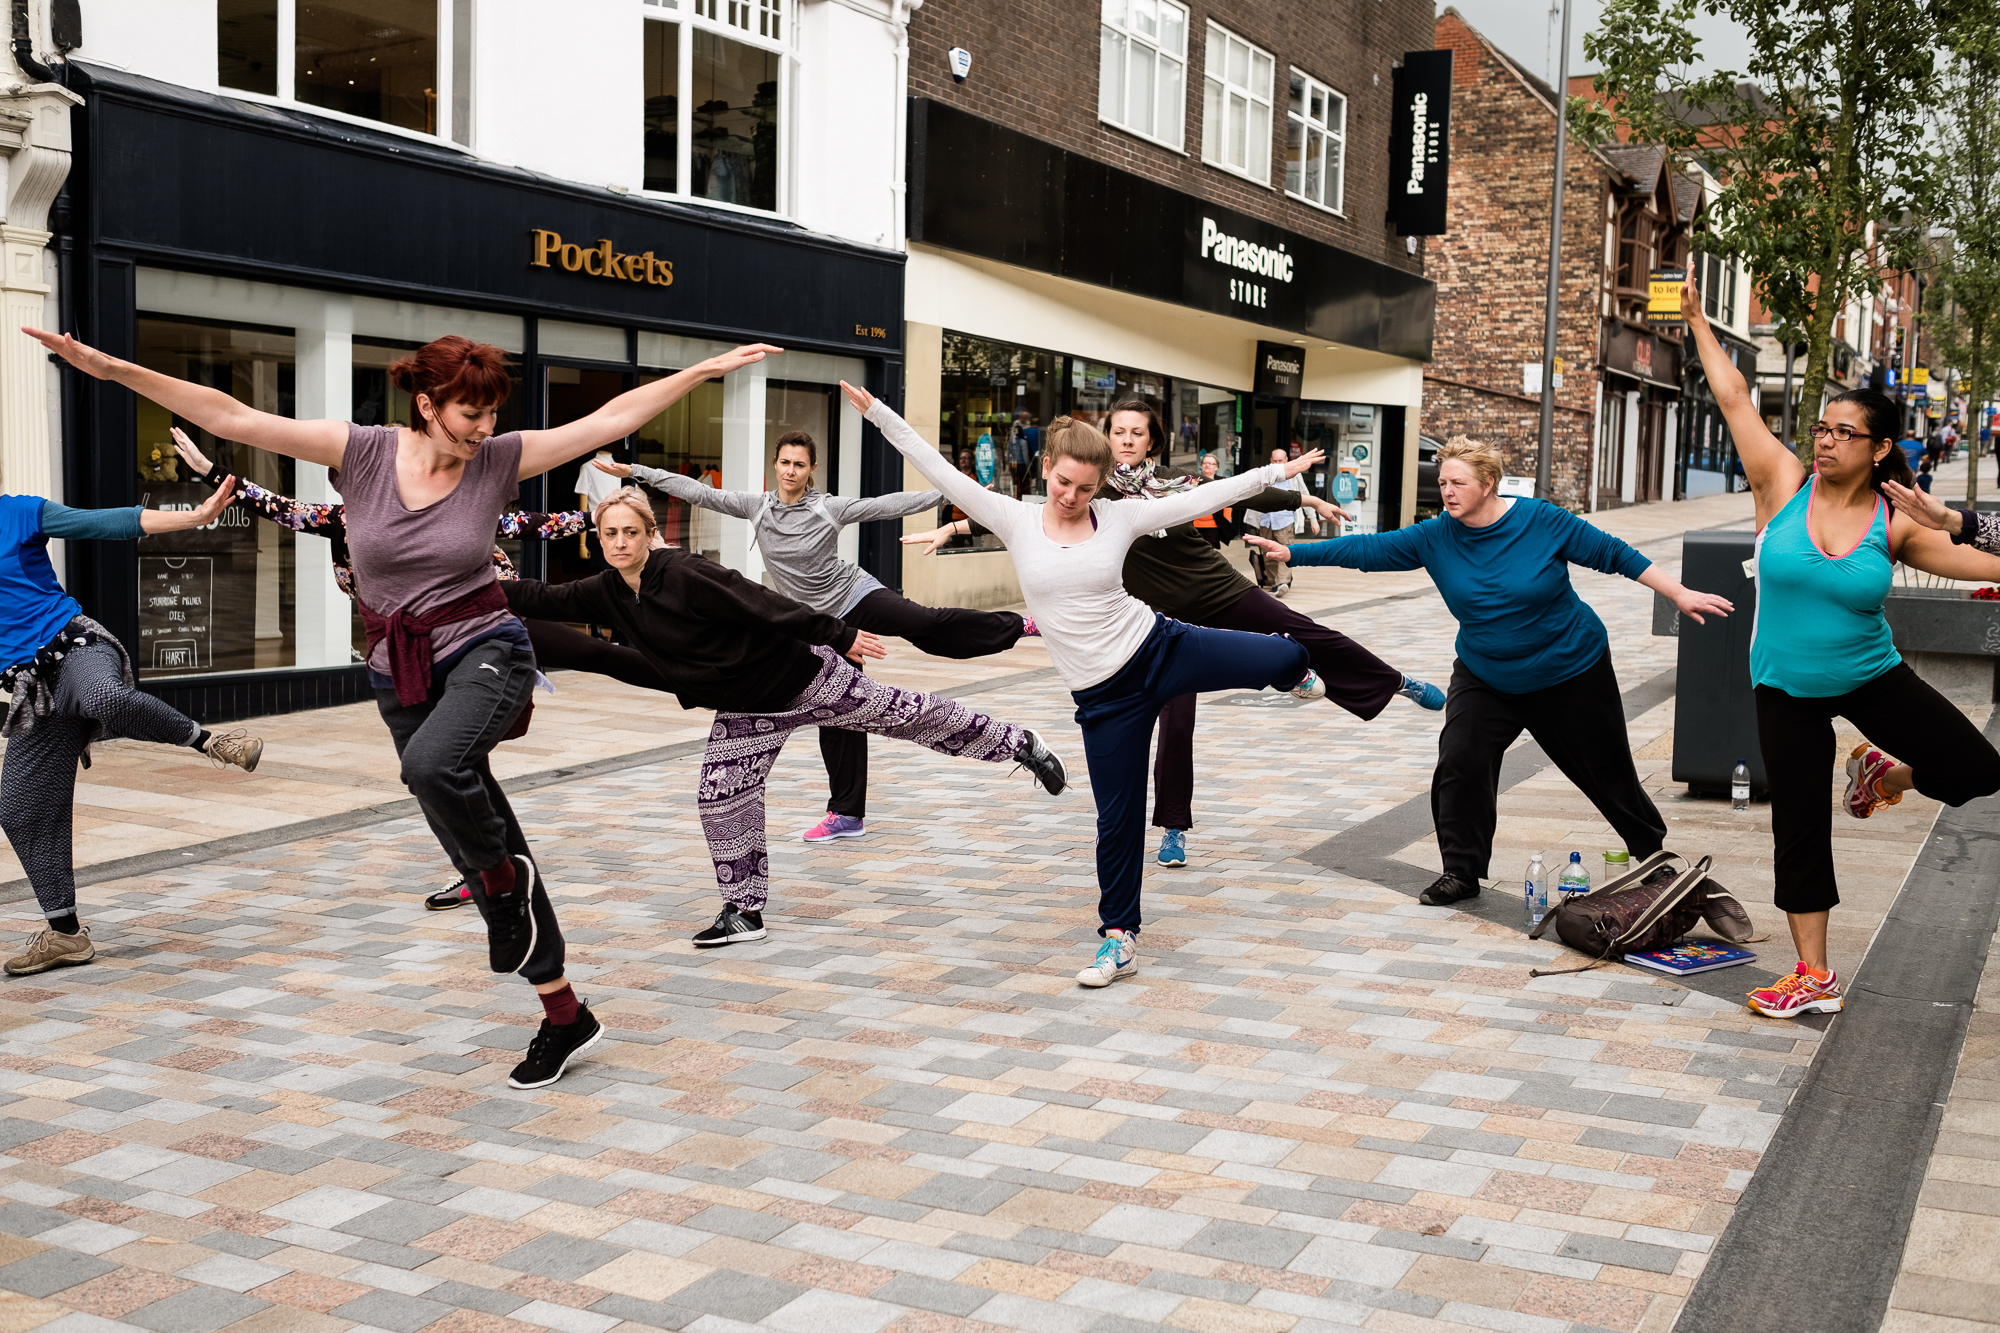 Restoke - Big Dance Rehearsal - Dance Fridays - Dancing in the Street - The Regent Theatre,  Picadilly, Hanley - Documentary Photography by Jenny Harper-12.jpg